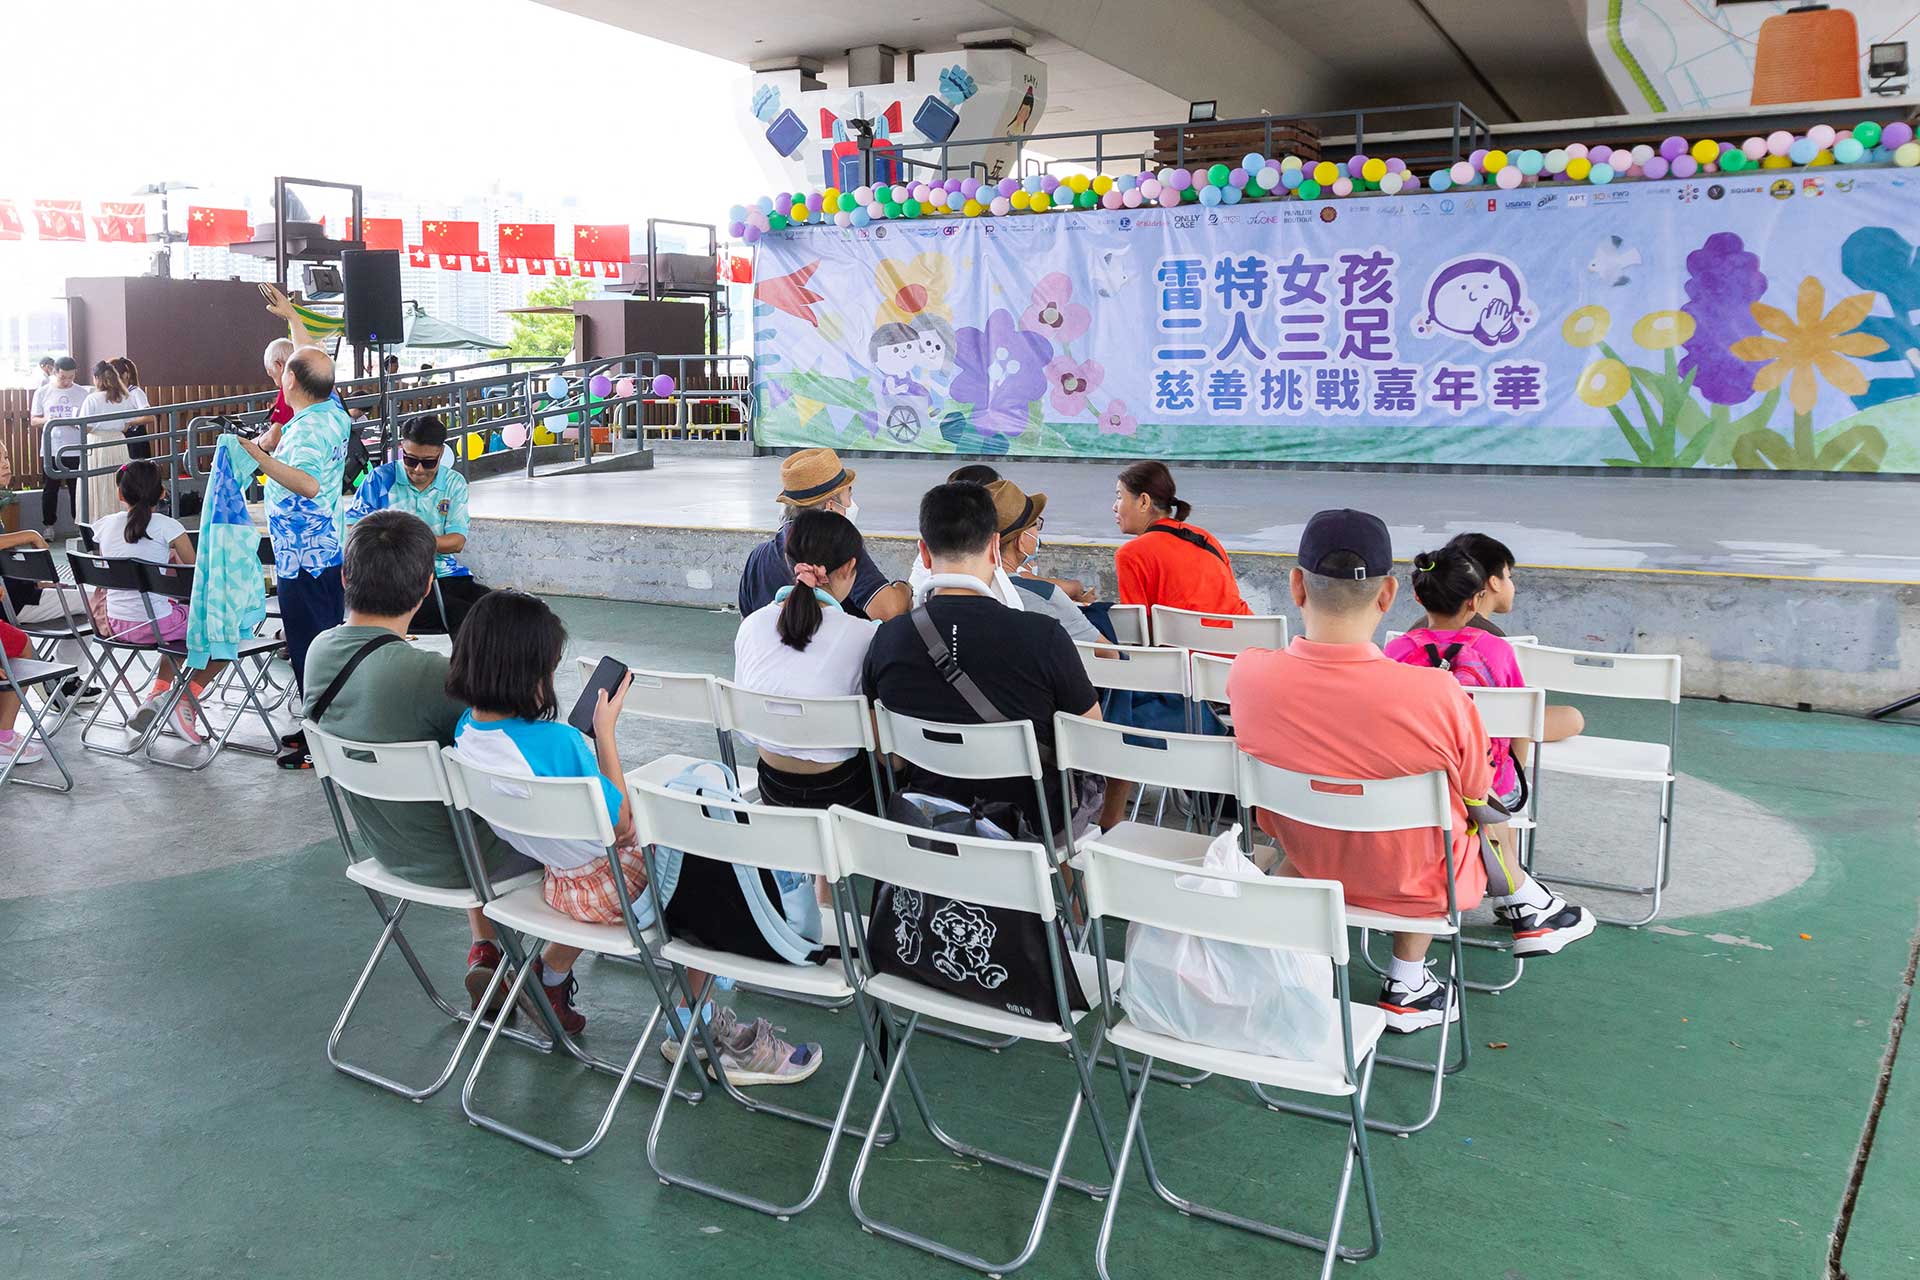 Kidrise participated as a product sponsor at the [Rett Girls Two Three Legged Charity Challenge Carnival] organized by the Hong Kong Rett Syndrome Association, hoping to use the carnival to arouse public attention to the plight of Rett syndrome patients and lend a helping hand. Sending positive energy and love.